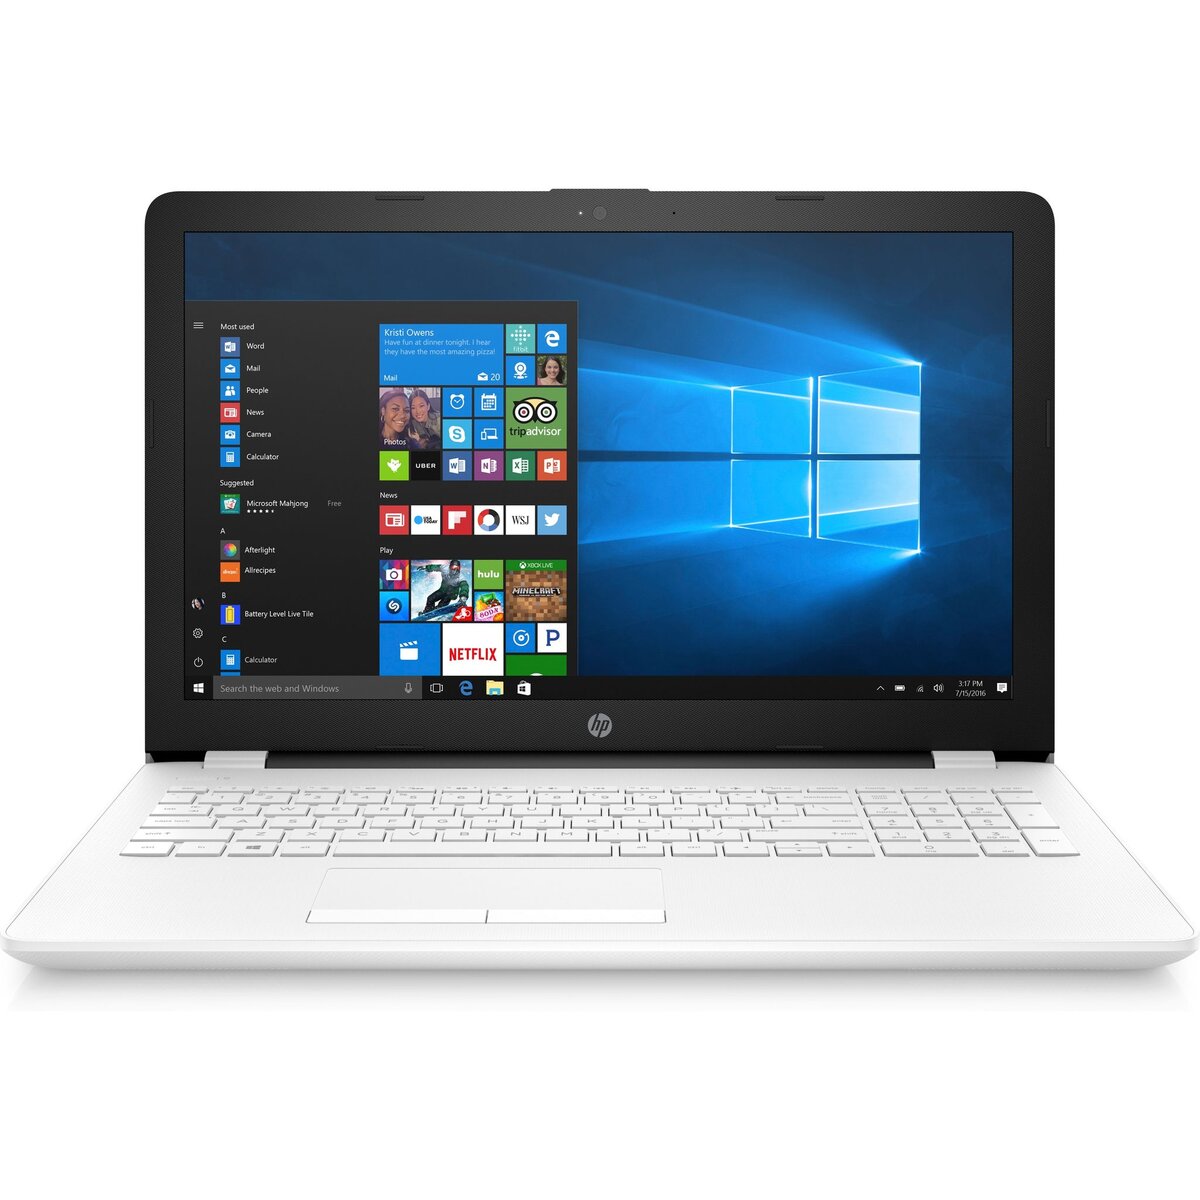 HP Ordinateur portable Notebook 15-bw016nf - 1 To - Blanc